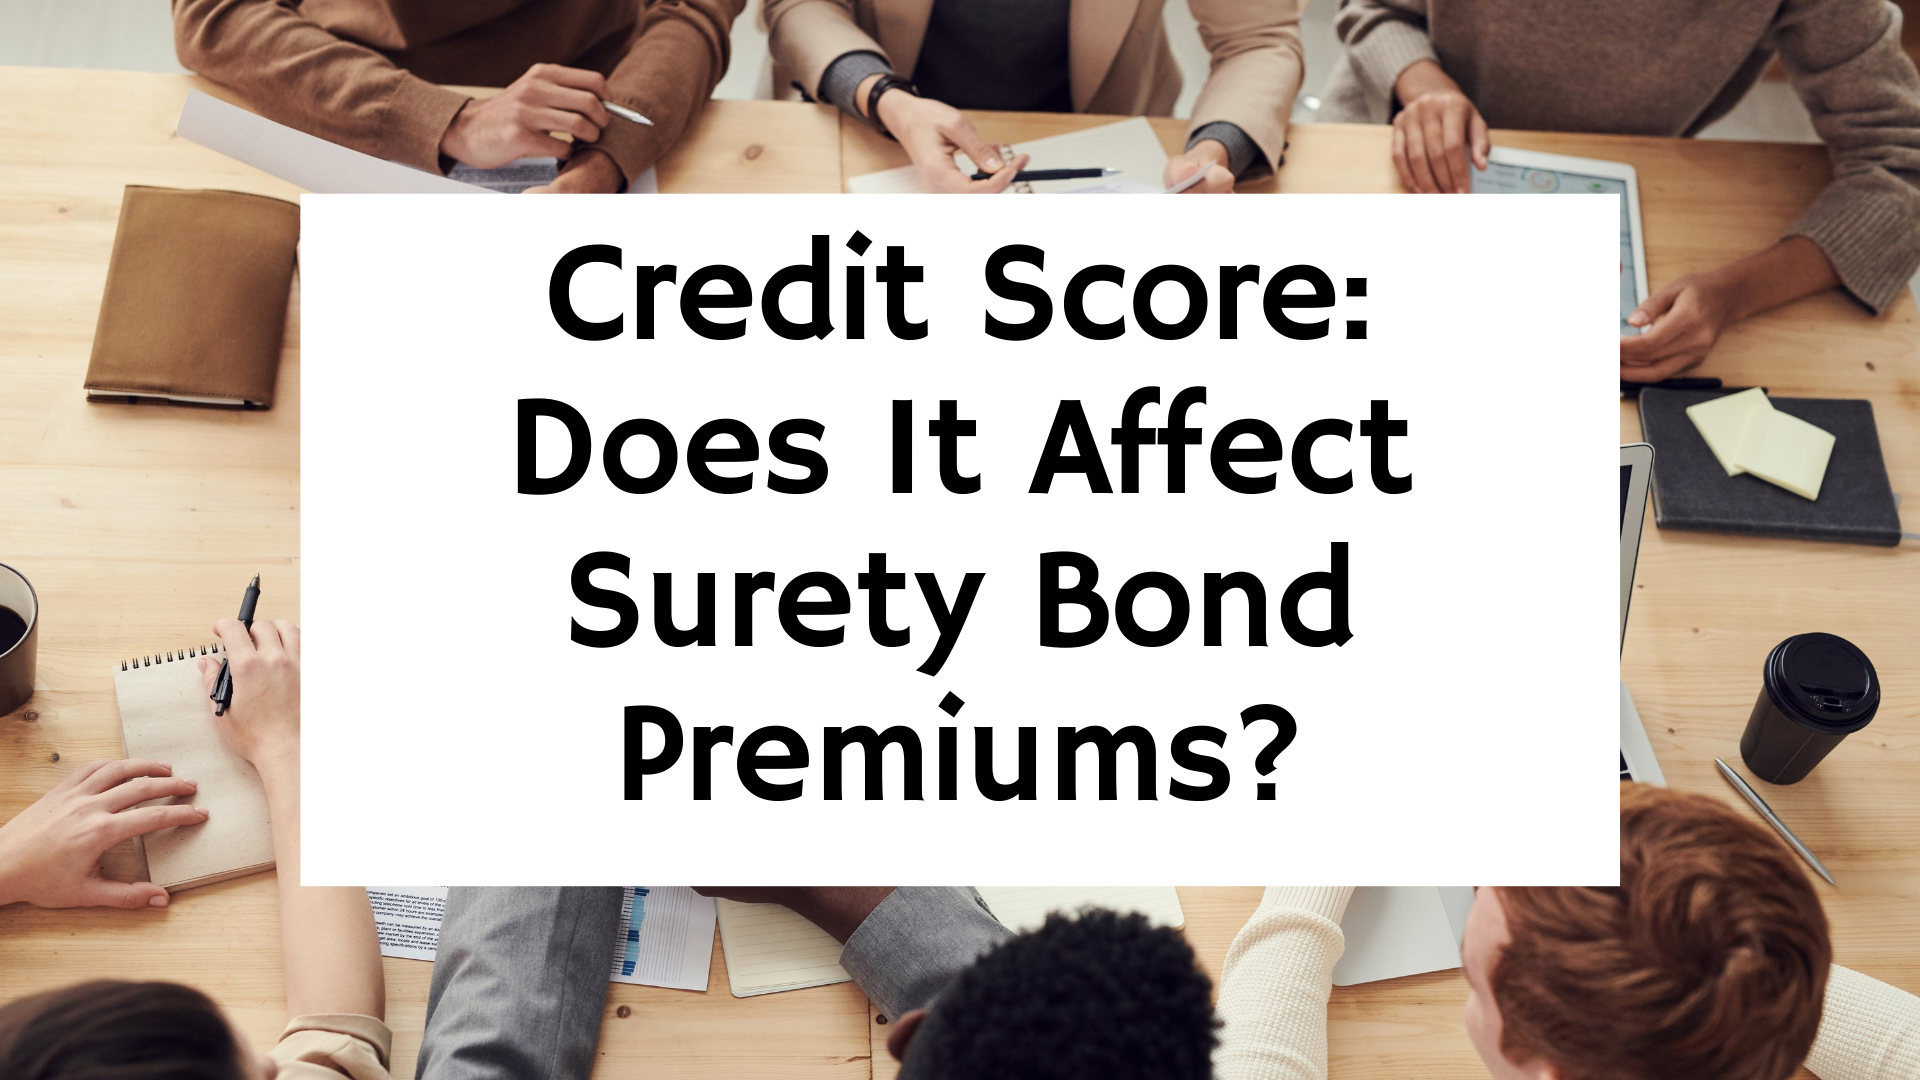 surety bond - Is it true that surety bonds are dependent on credit - individuals having a meeting